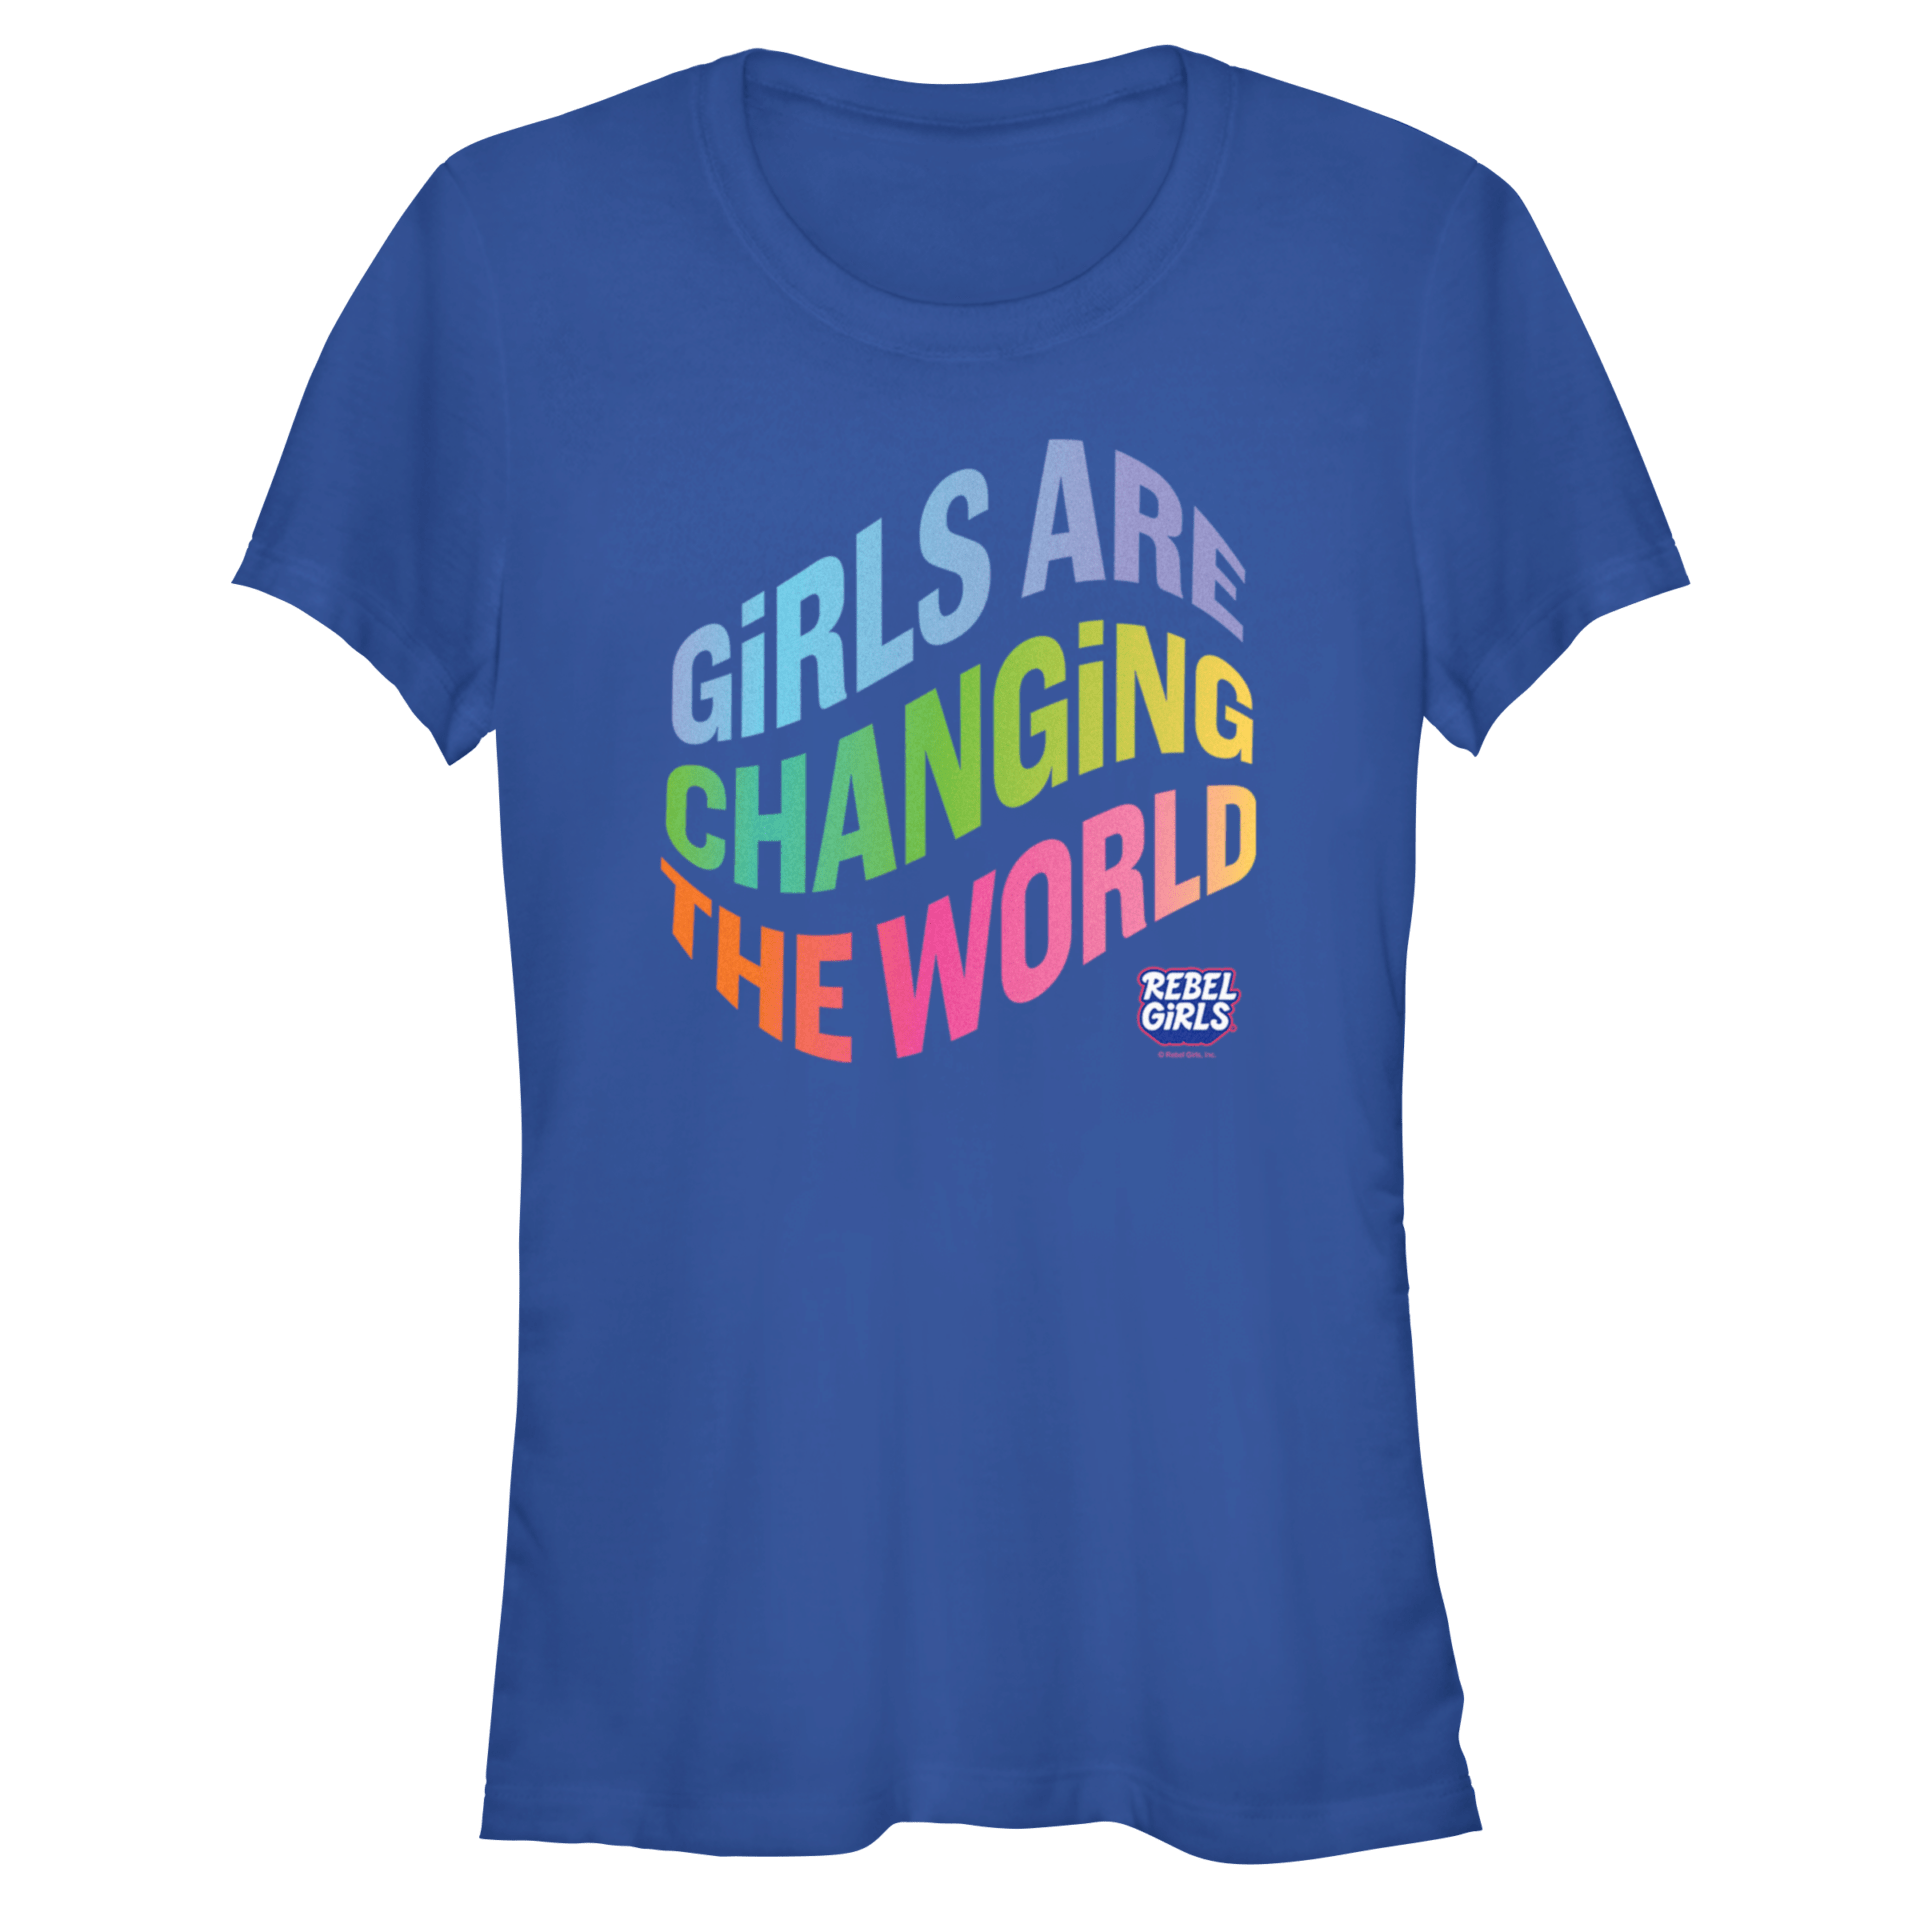 “Girls are Changing the World” Tees and Tops - thumbnail no 3